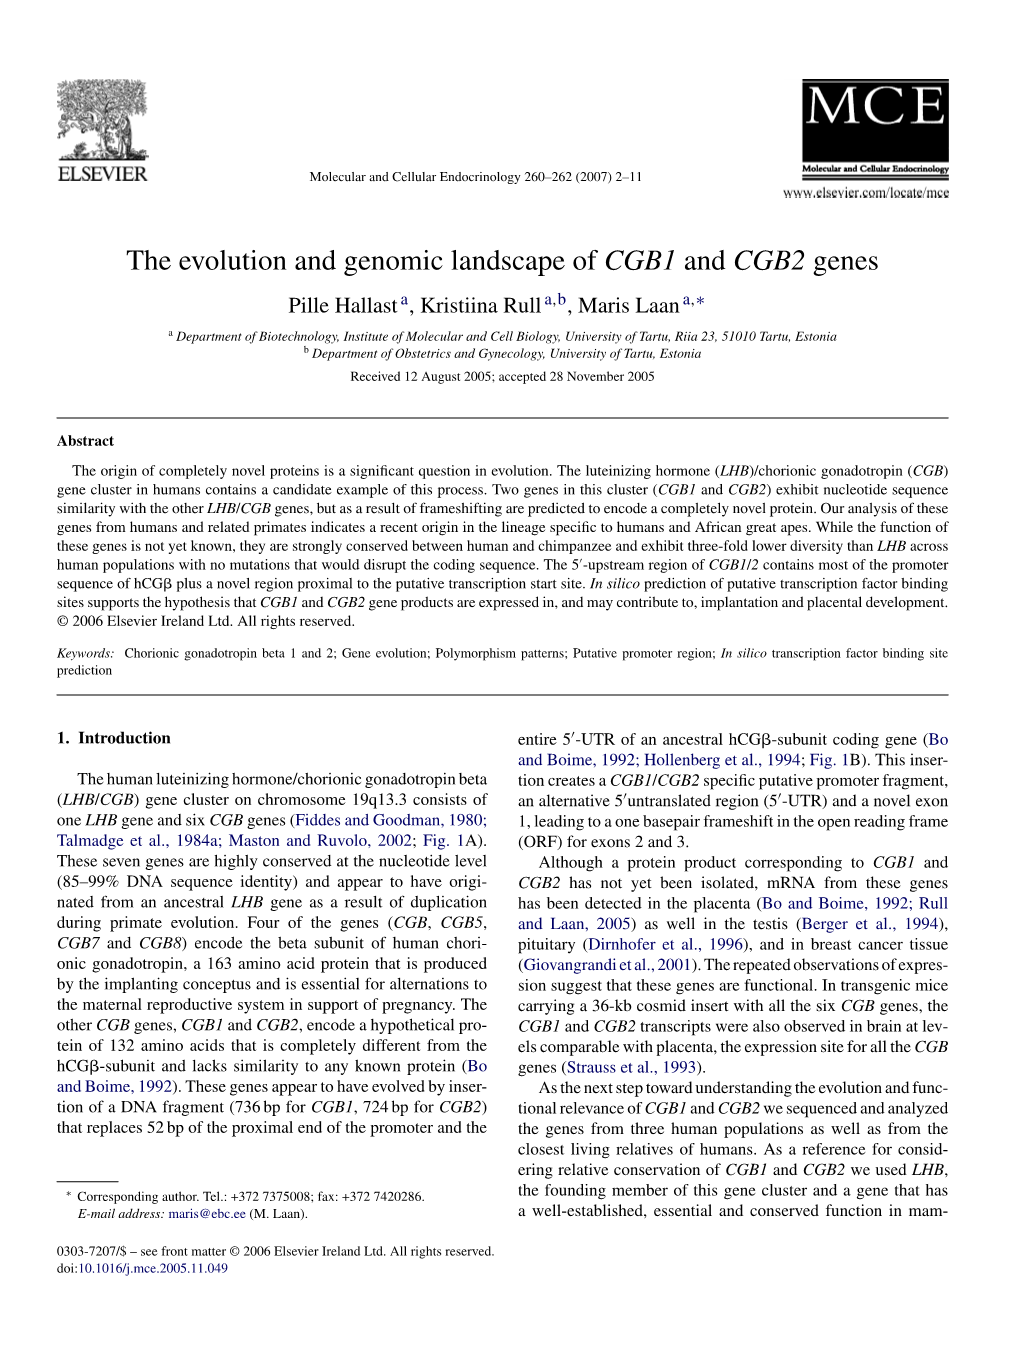 The Evolution and Genomic Landscape of CGB1 and CGB2 Genes